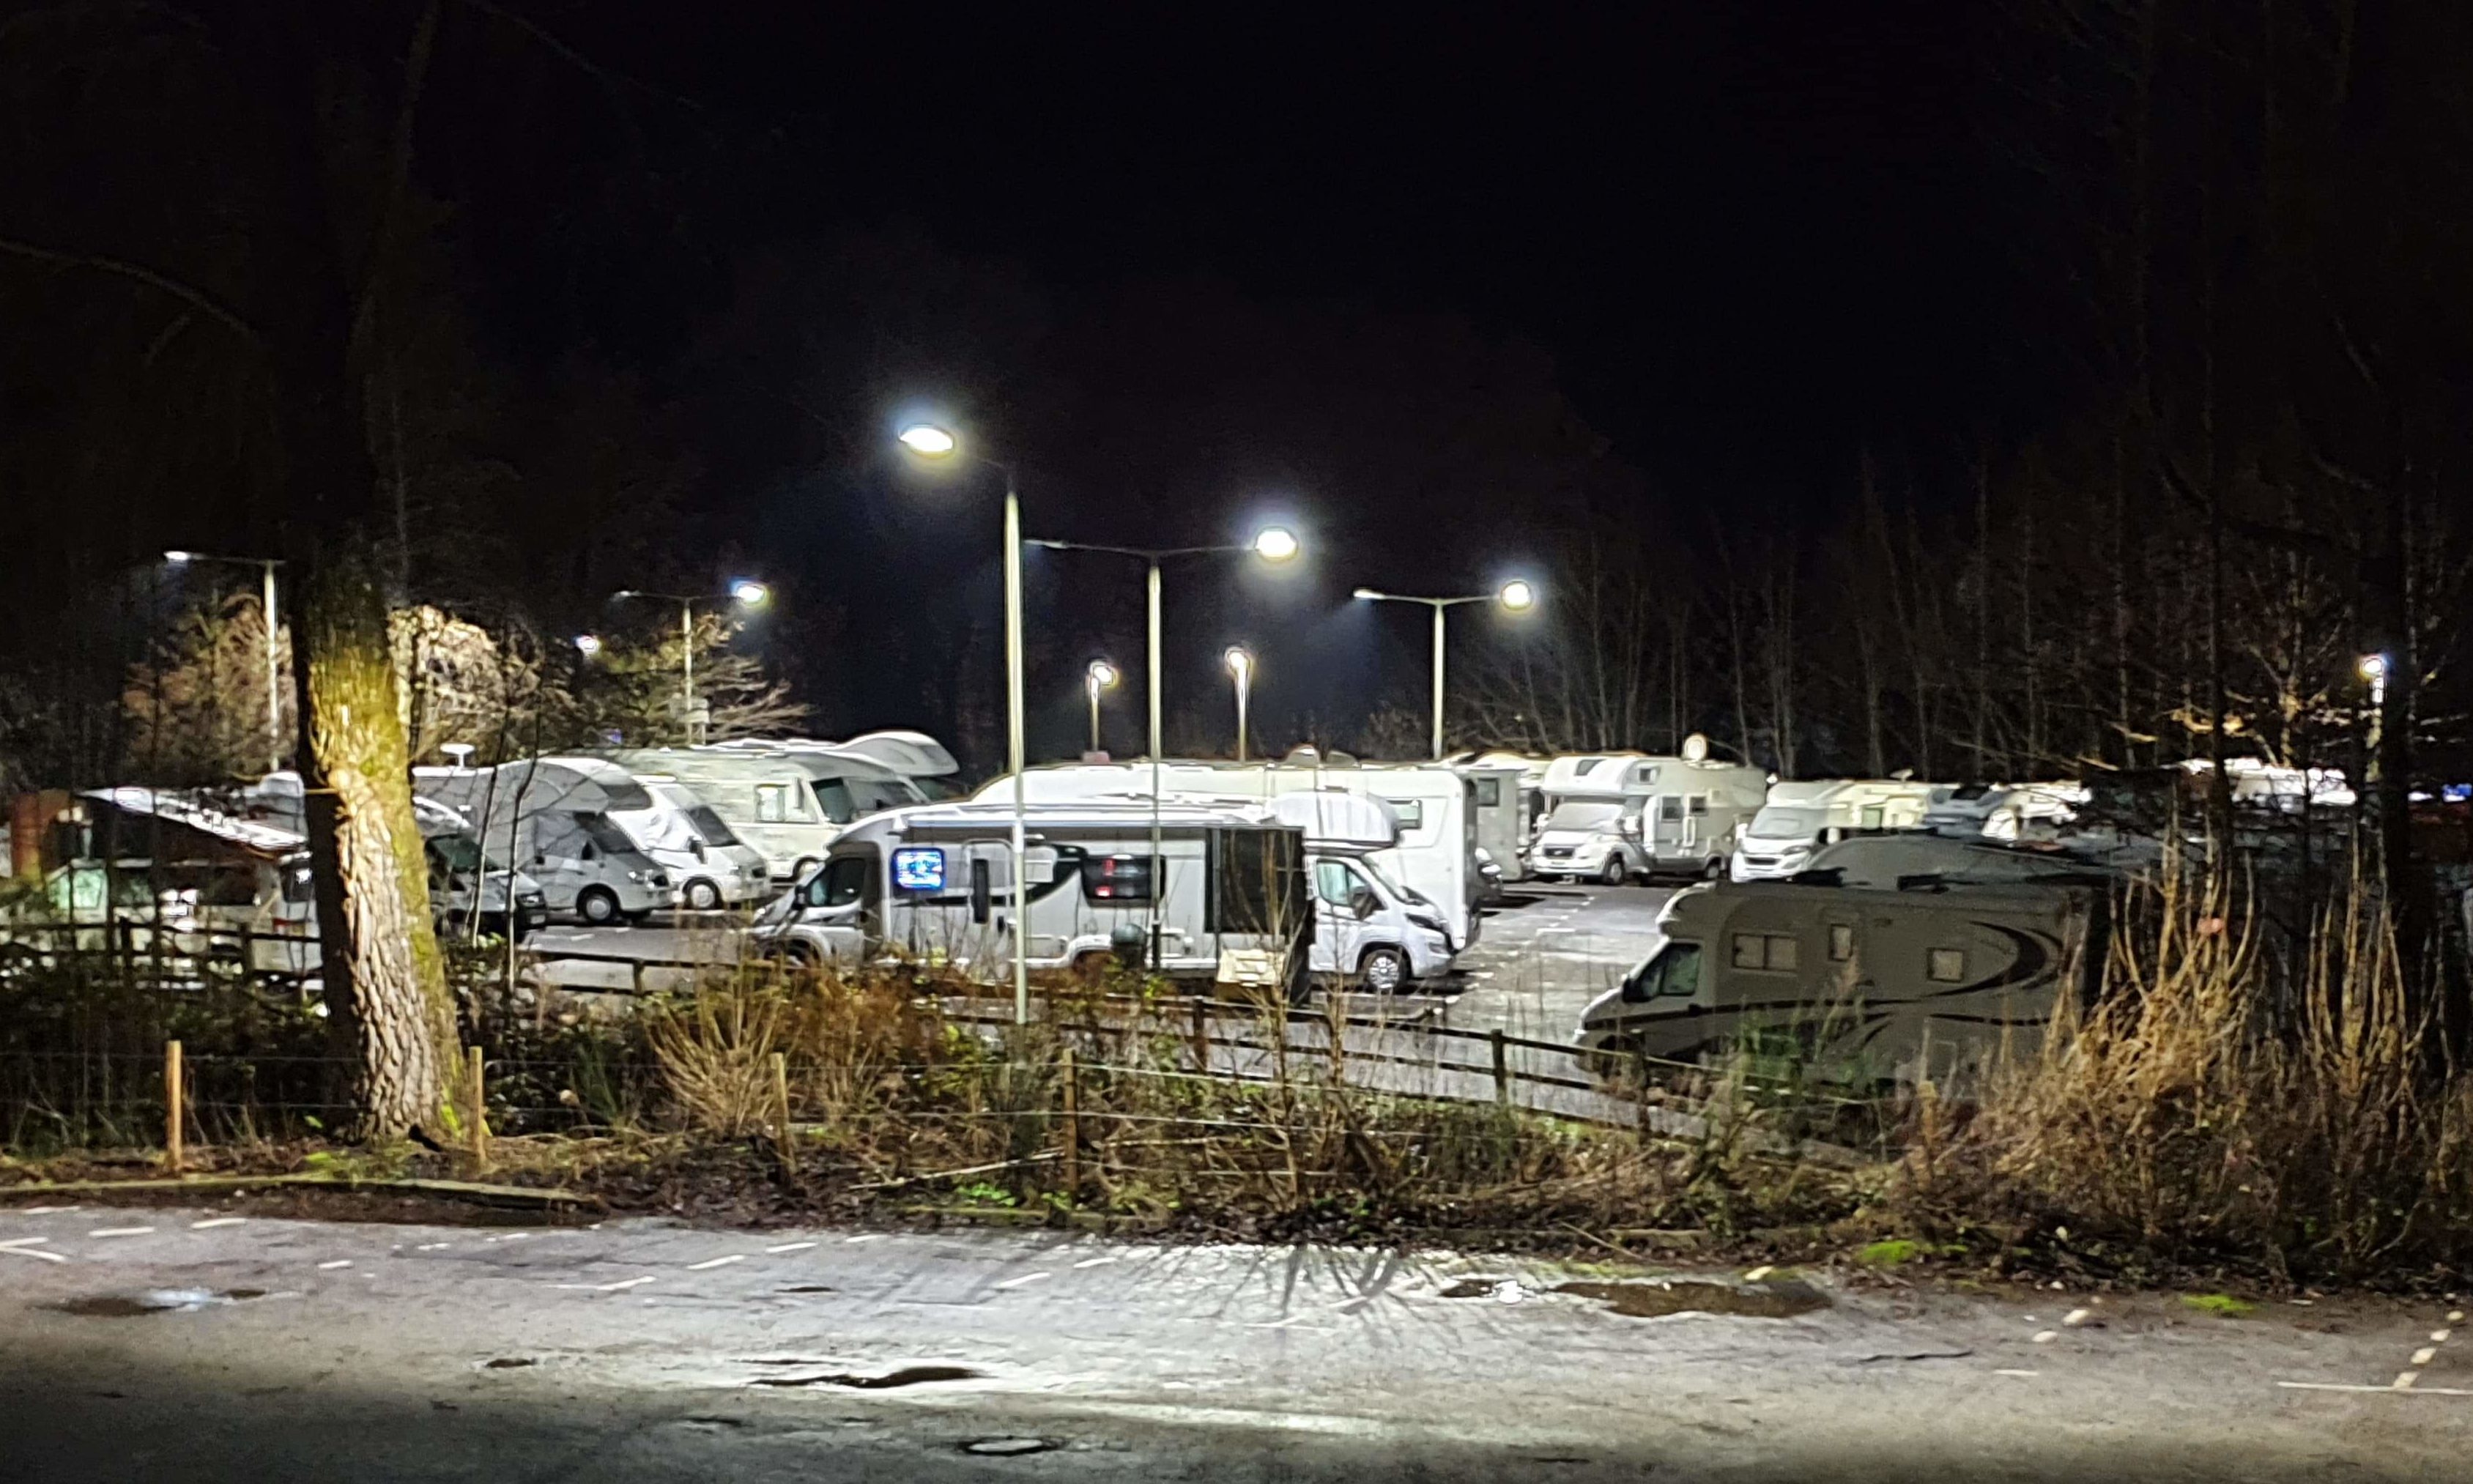 The Pitlochry caravans at night